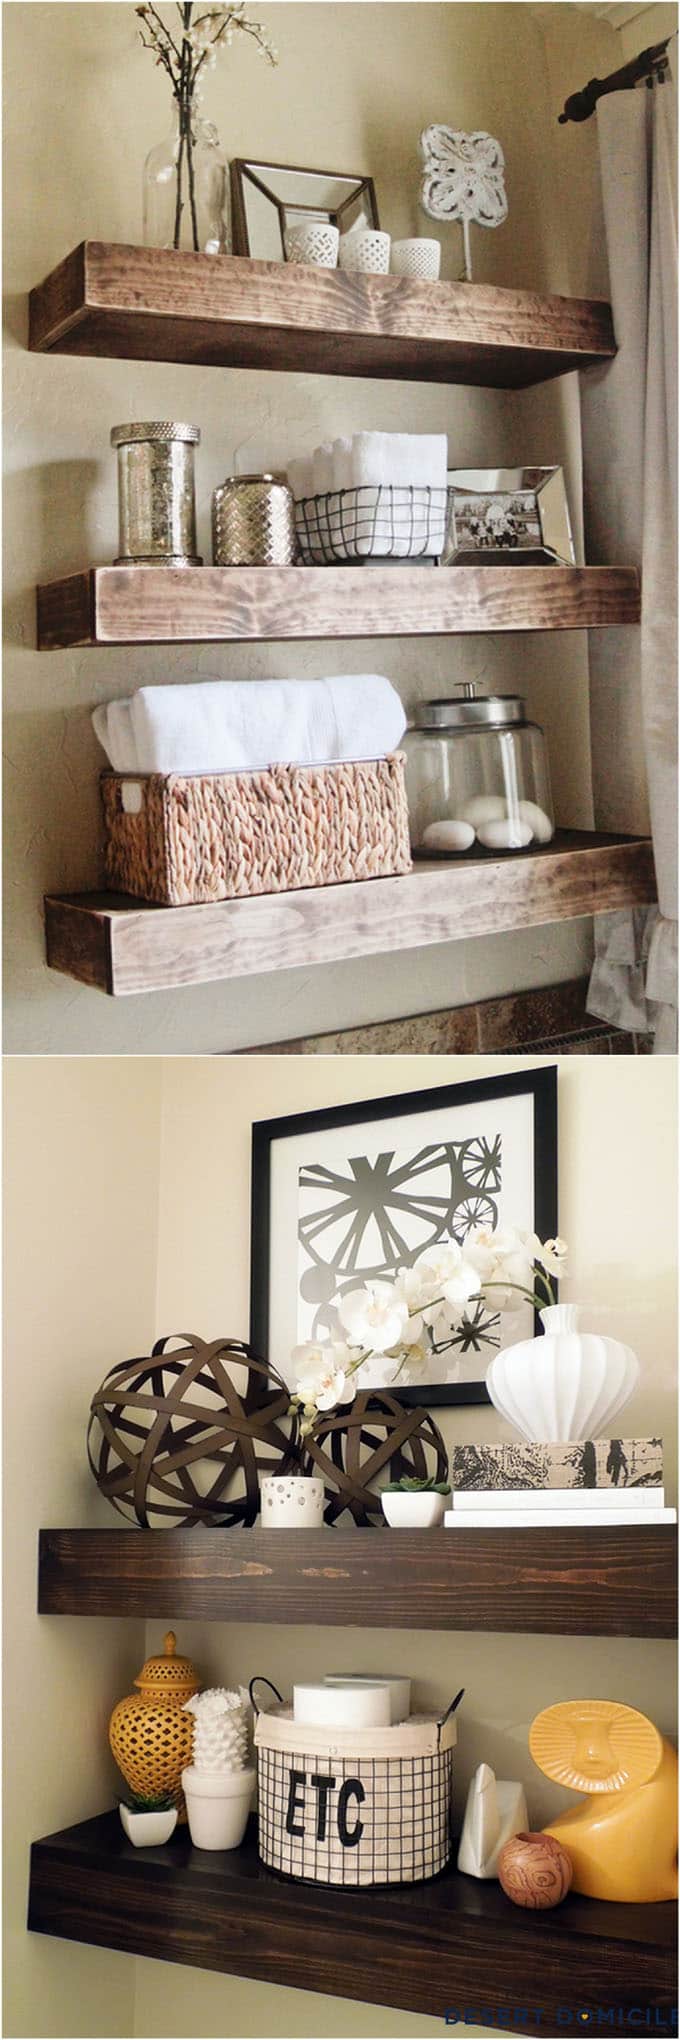 16 easy tutorials on building beautiful floating shelves and wall shelves!  Check out all the gorgeous bracket…